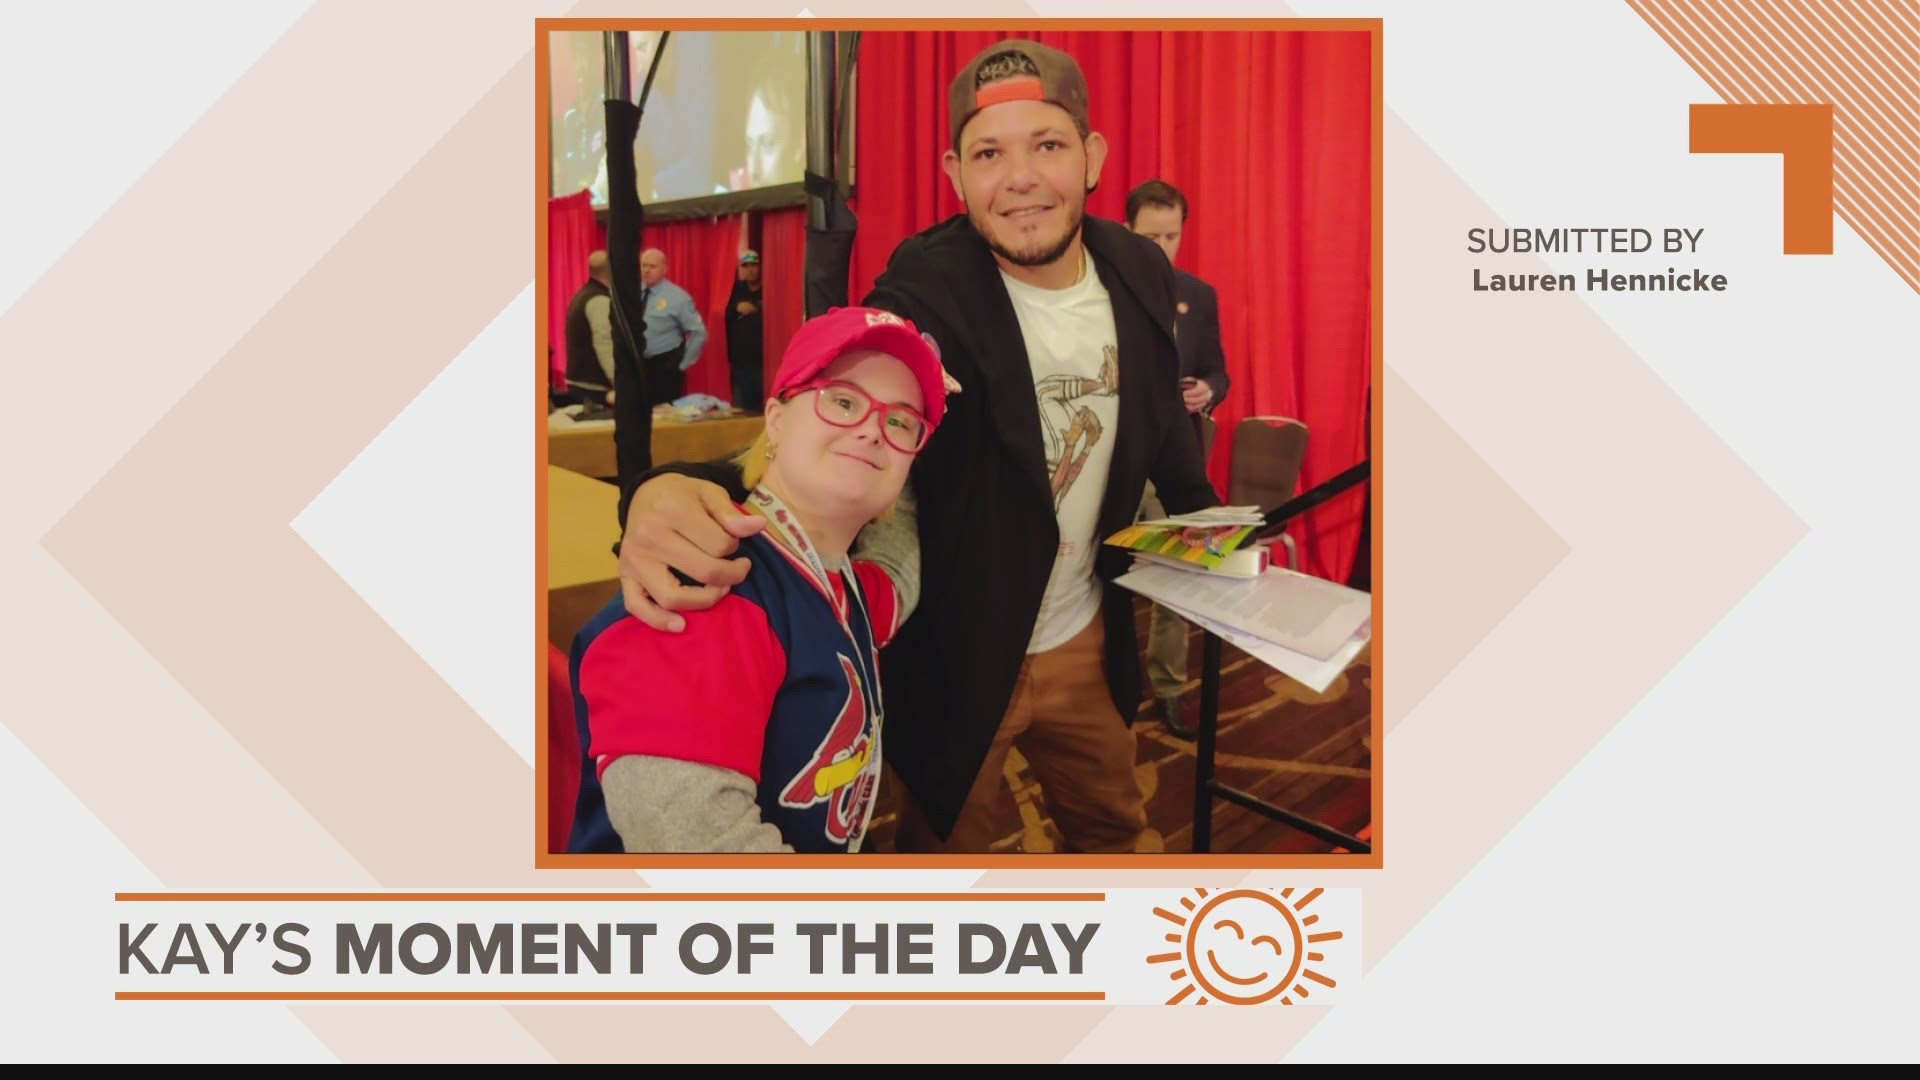 We're celebrating the Cards Home Opener in our Moment of the Day!